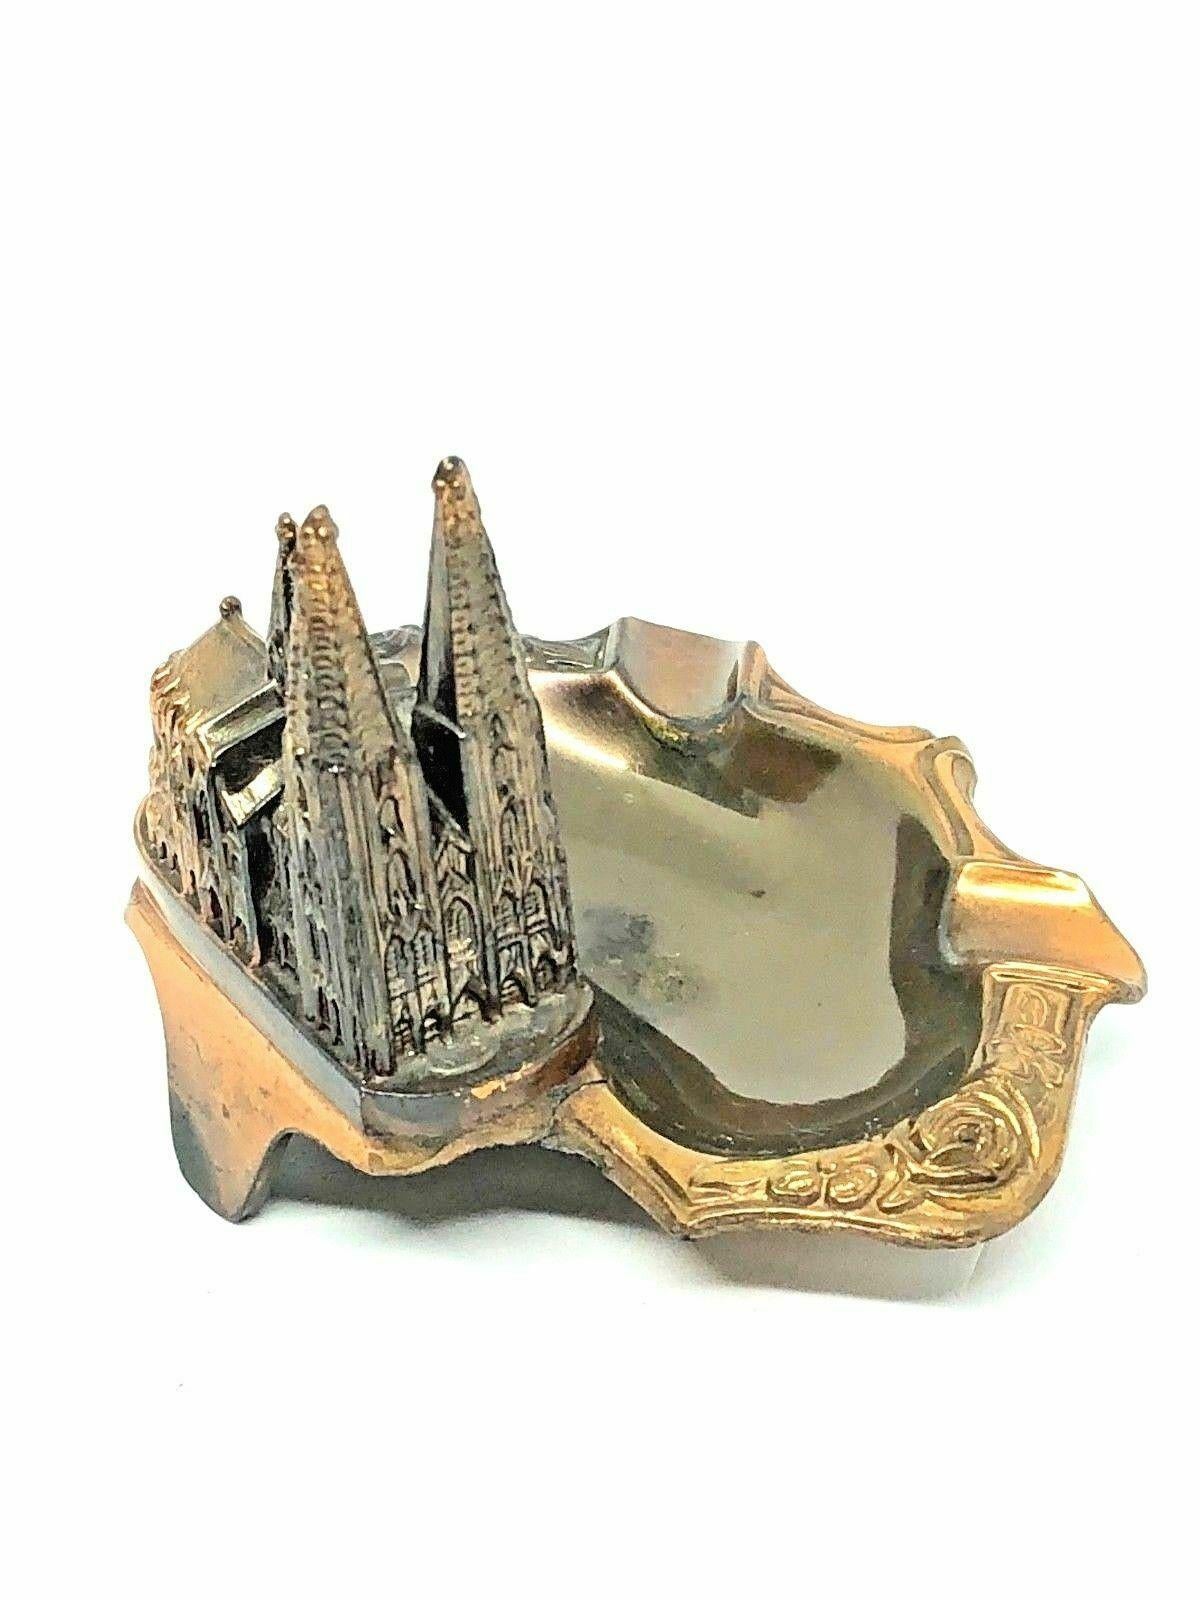 A 1950s souvenir building architectural model Ashtray. Some wear with a nice patina, but this is old-age. Made of metal. A beautiful nice desktop item or just a display item in your collections of souvenirs from around the world.

  